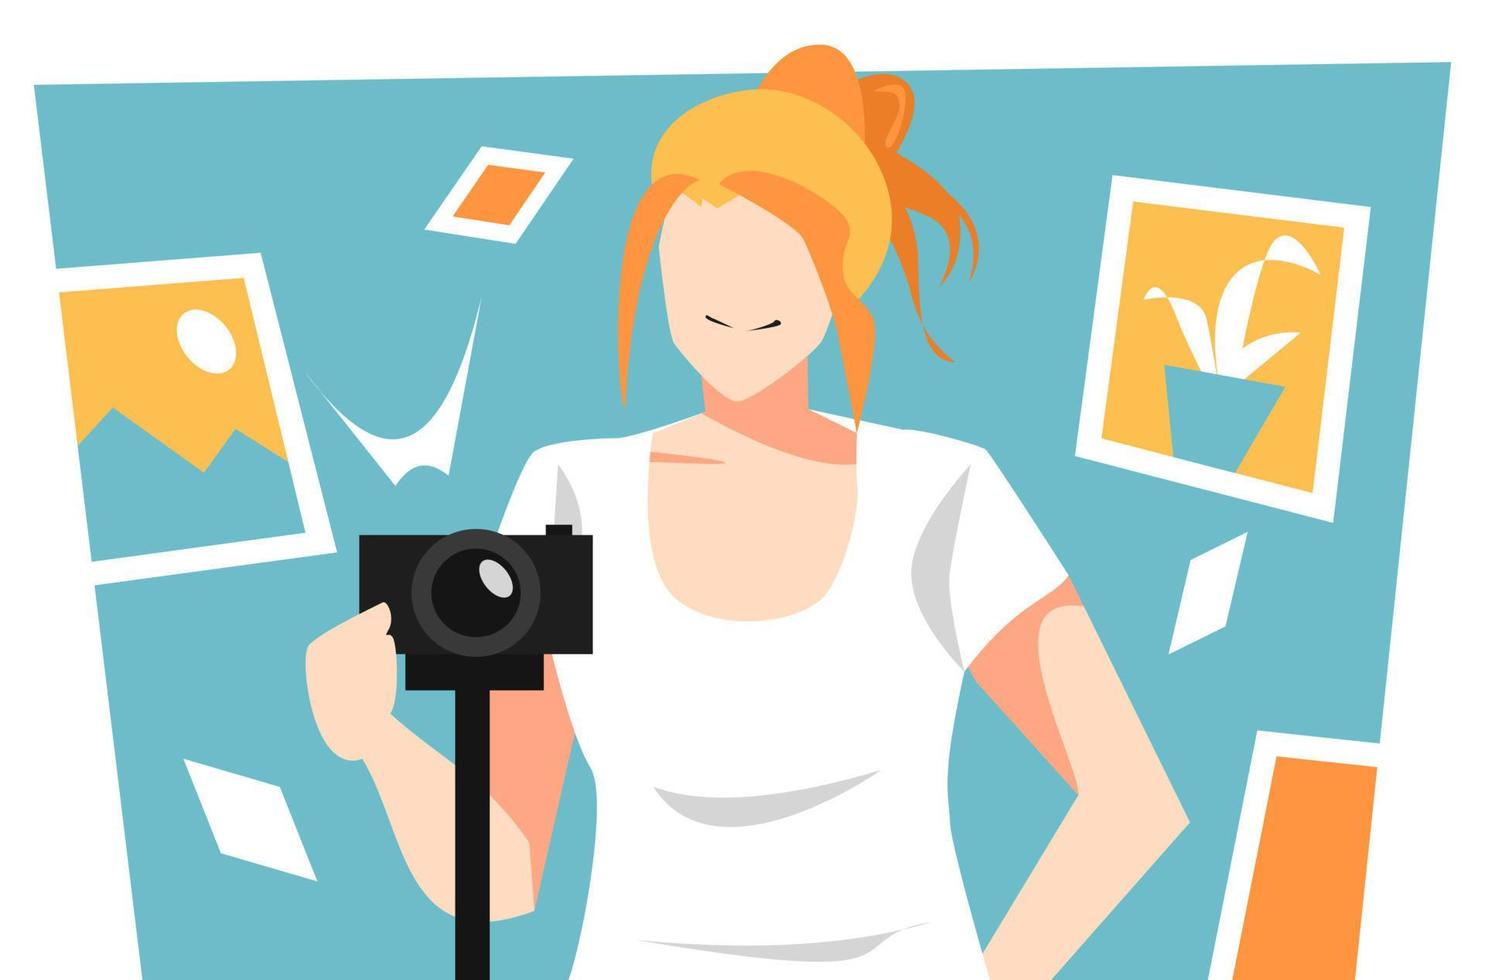 illustration of beautiful girl holding camera ready to take a photo. equipped with image icons, photo icons. concept and theme of profession, occupation, hobby, photographer. flat vector style